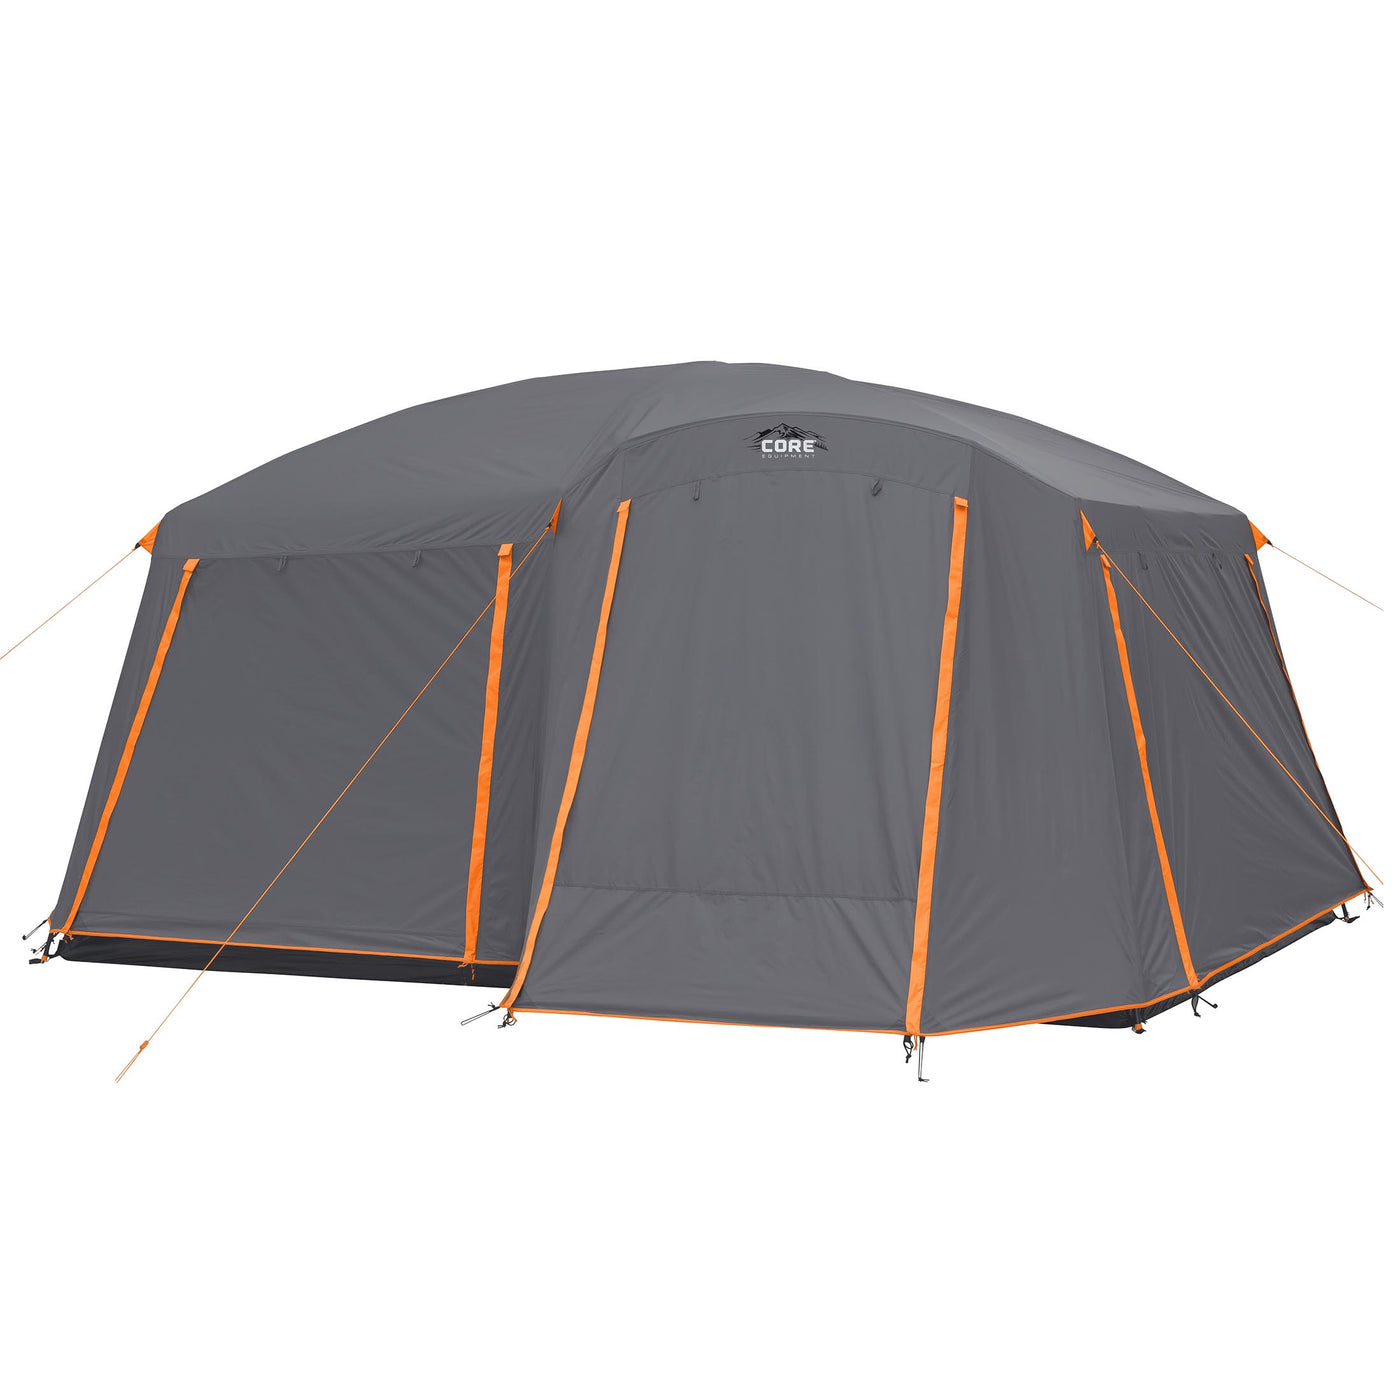 CORE® Equipment 10 Person Straight Wall Cabin Tent with Full Rainfly Setup  